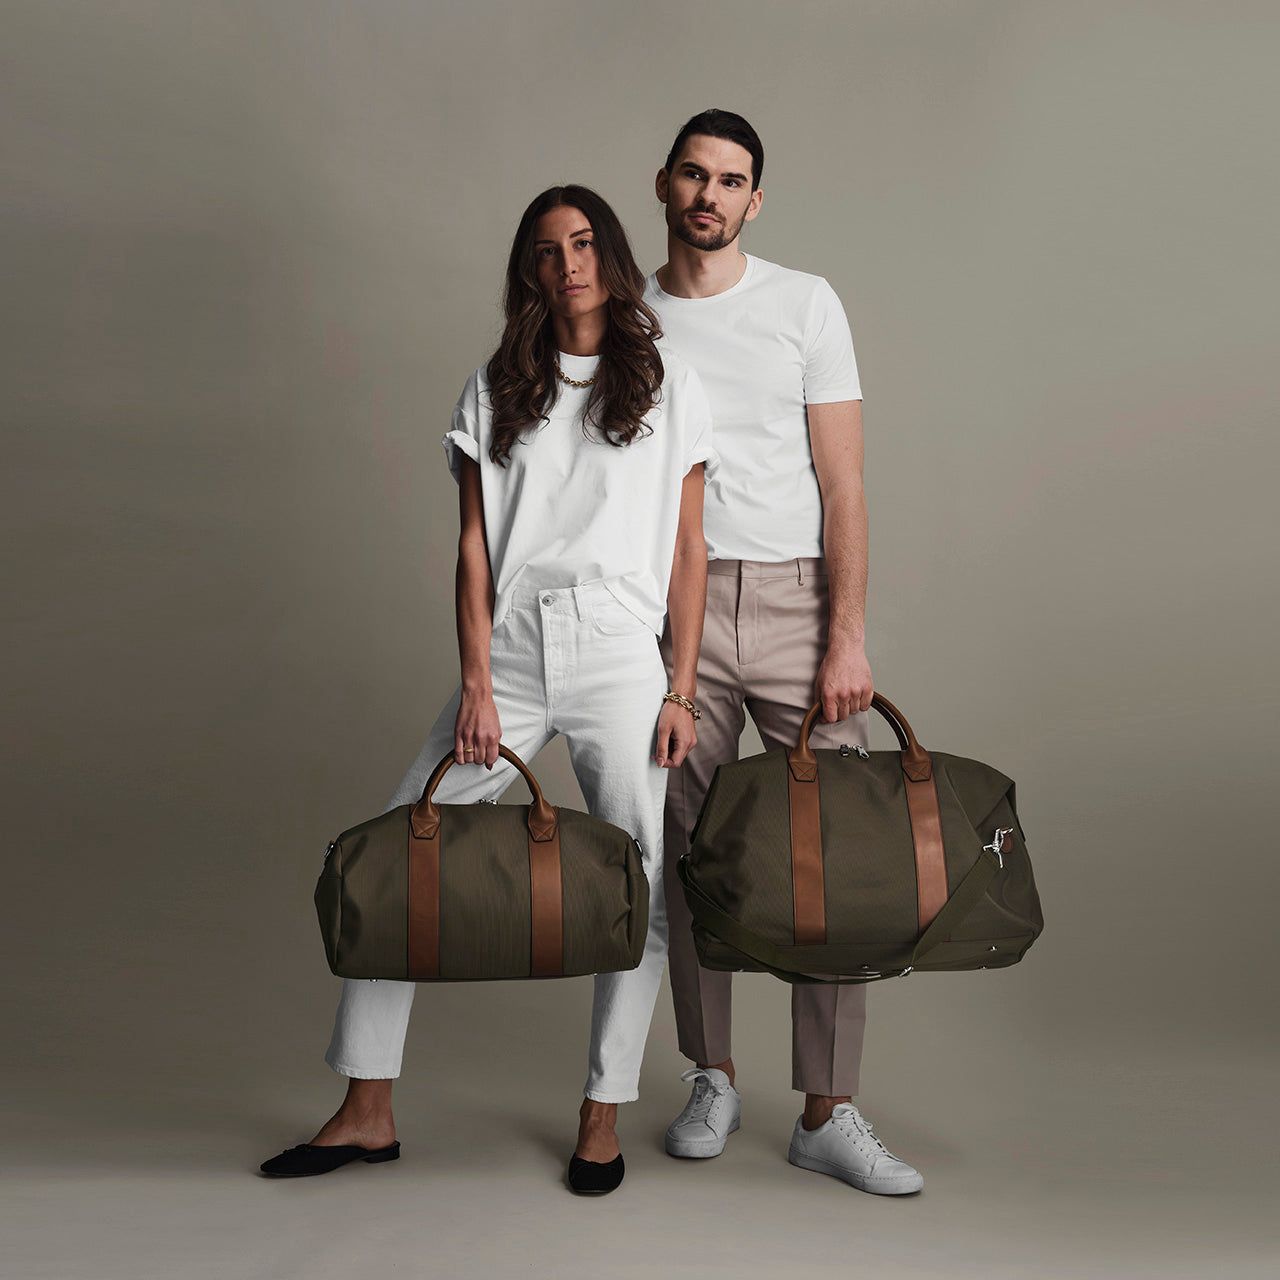 "Fashion model showcasing the versatile Weekender Bag, perfect for travel and style.